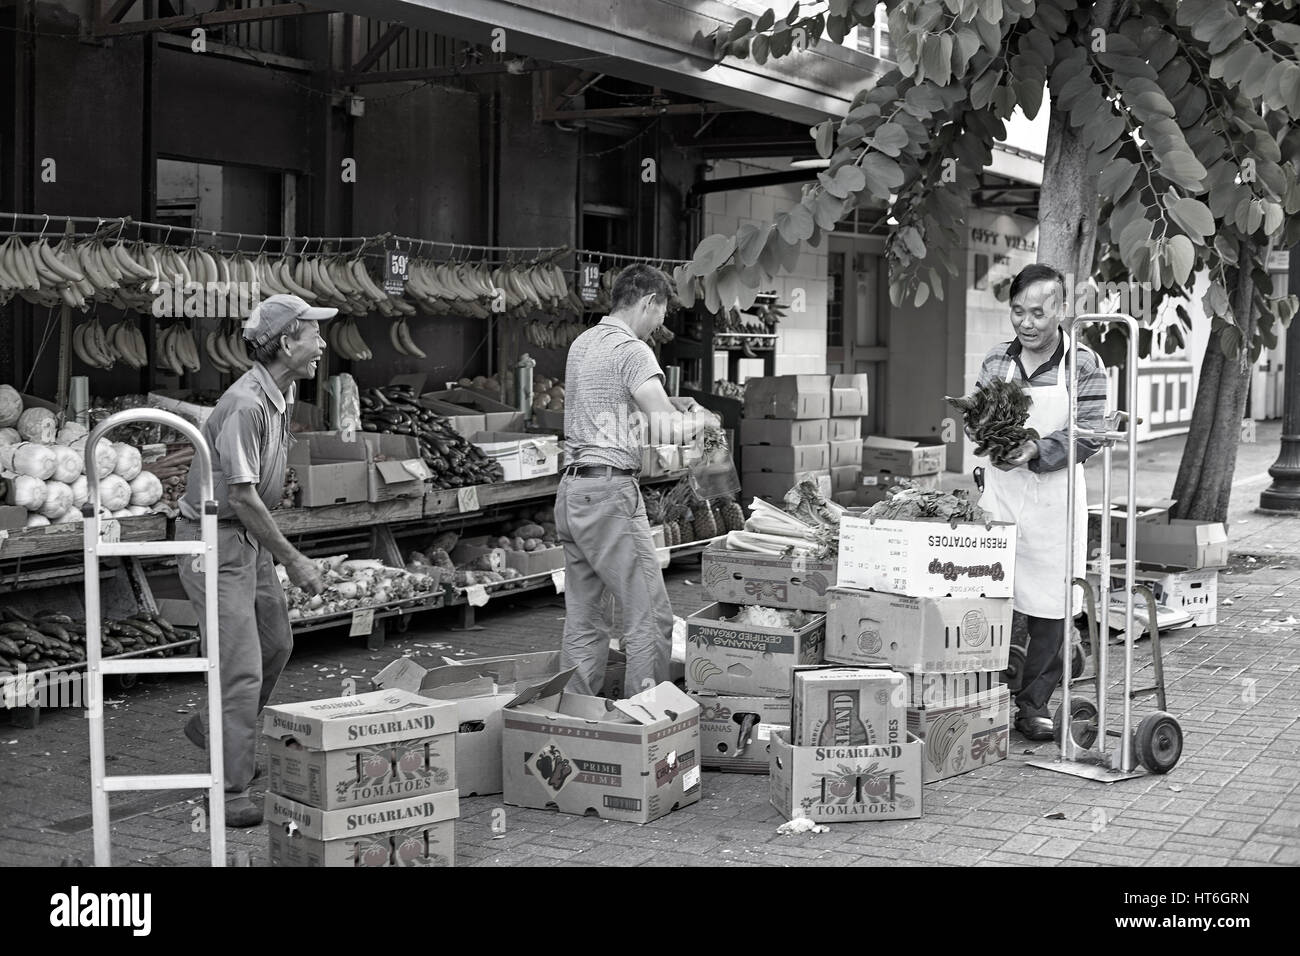 Honolulu; Hawaii; USA - August 6; 2016: Men working in Chinatown Historic District; a popular local destination and tourist attraction. Stock Photo